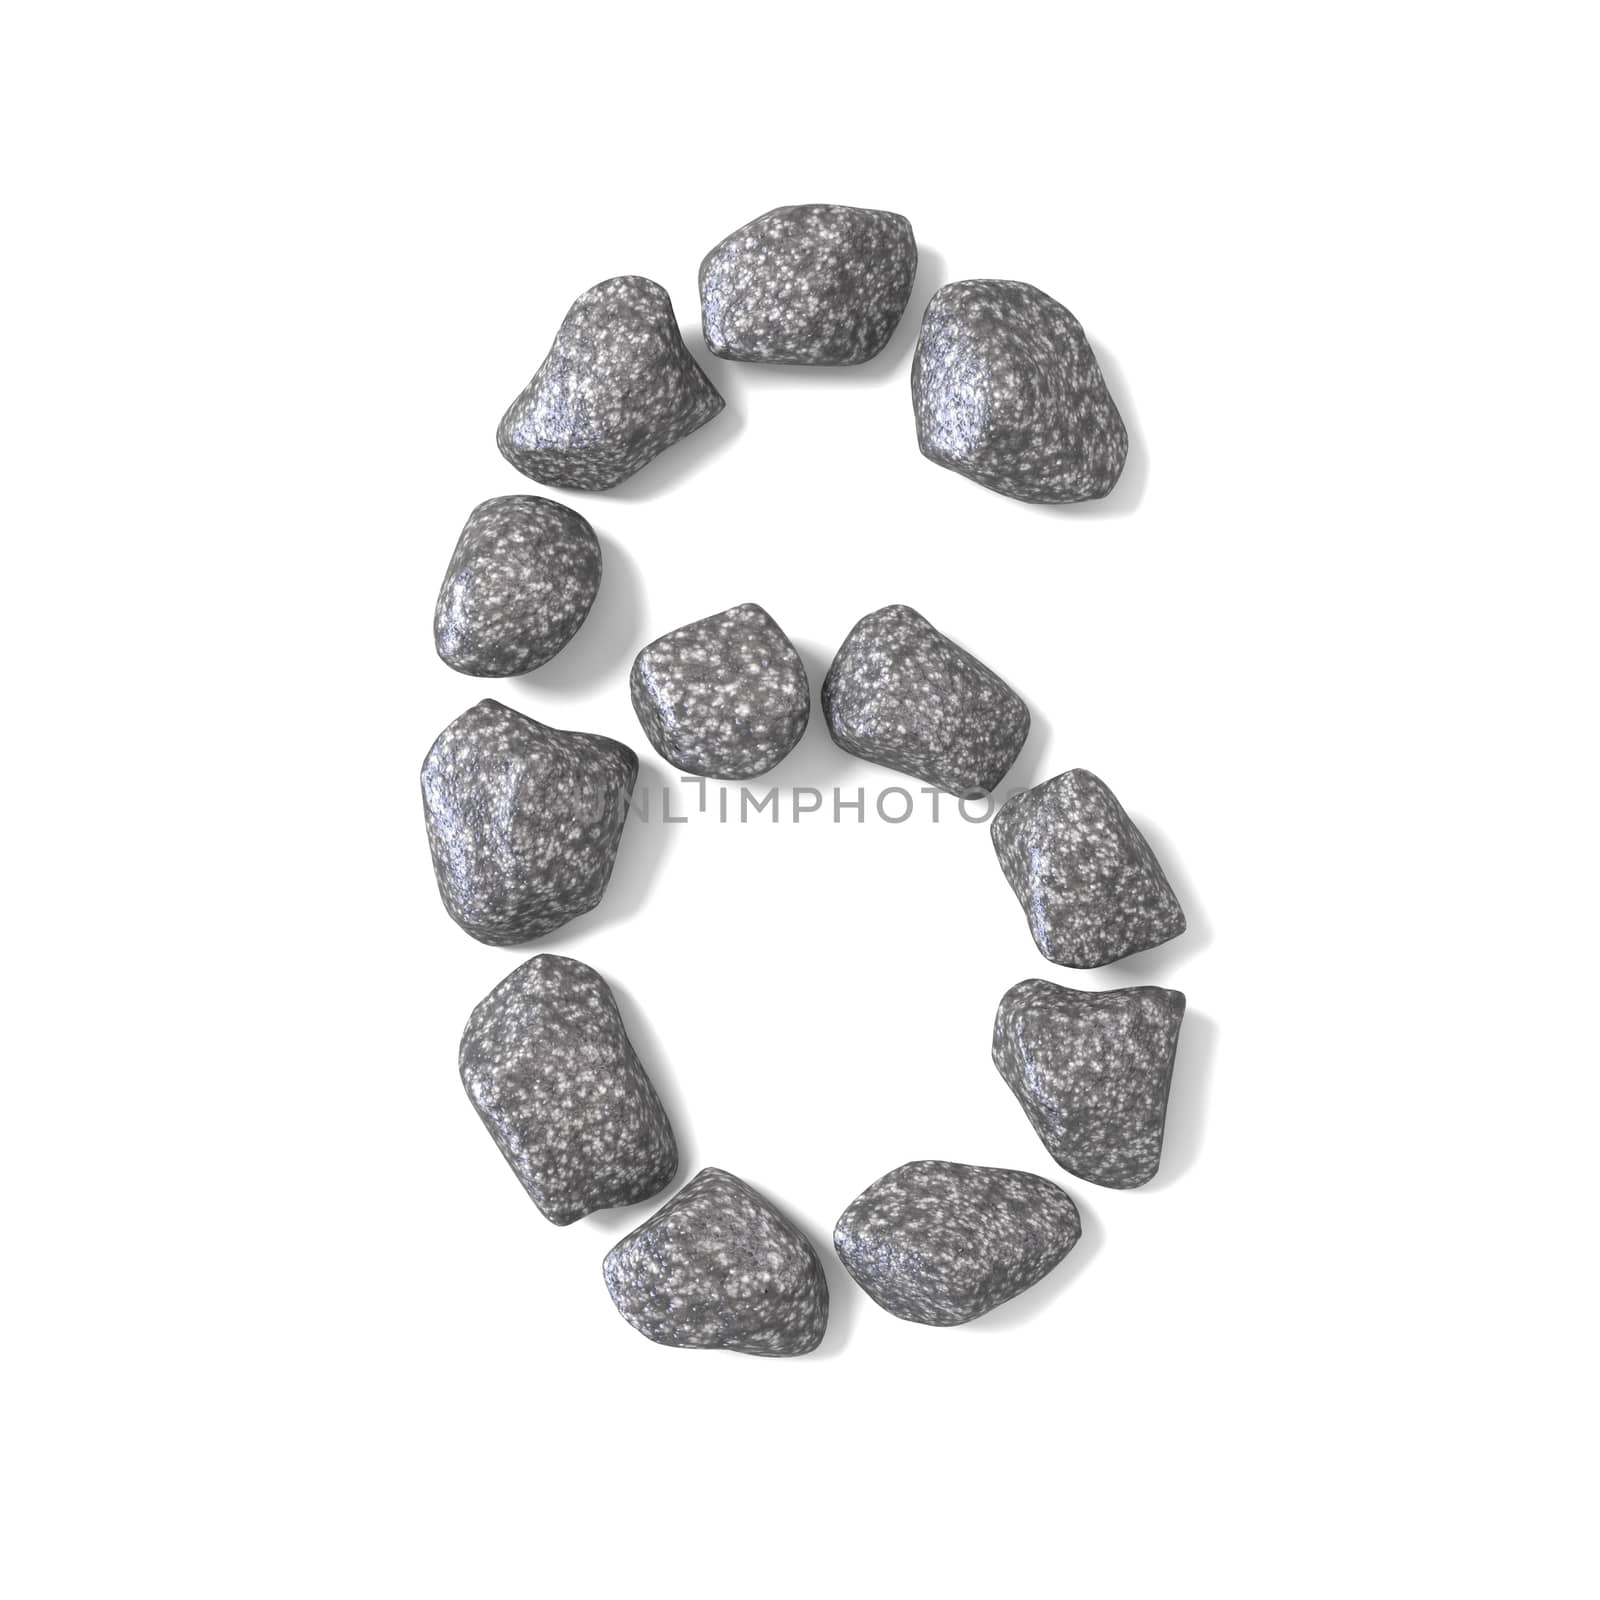 Font made of rocks NUMBER six 6 3D by djmilic